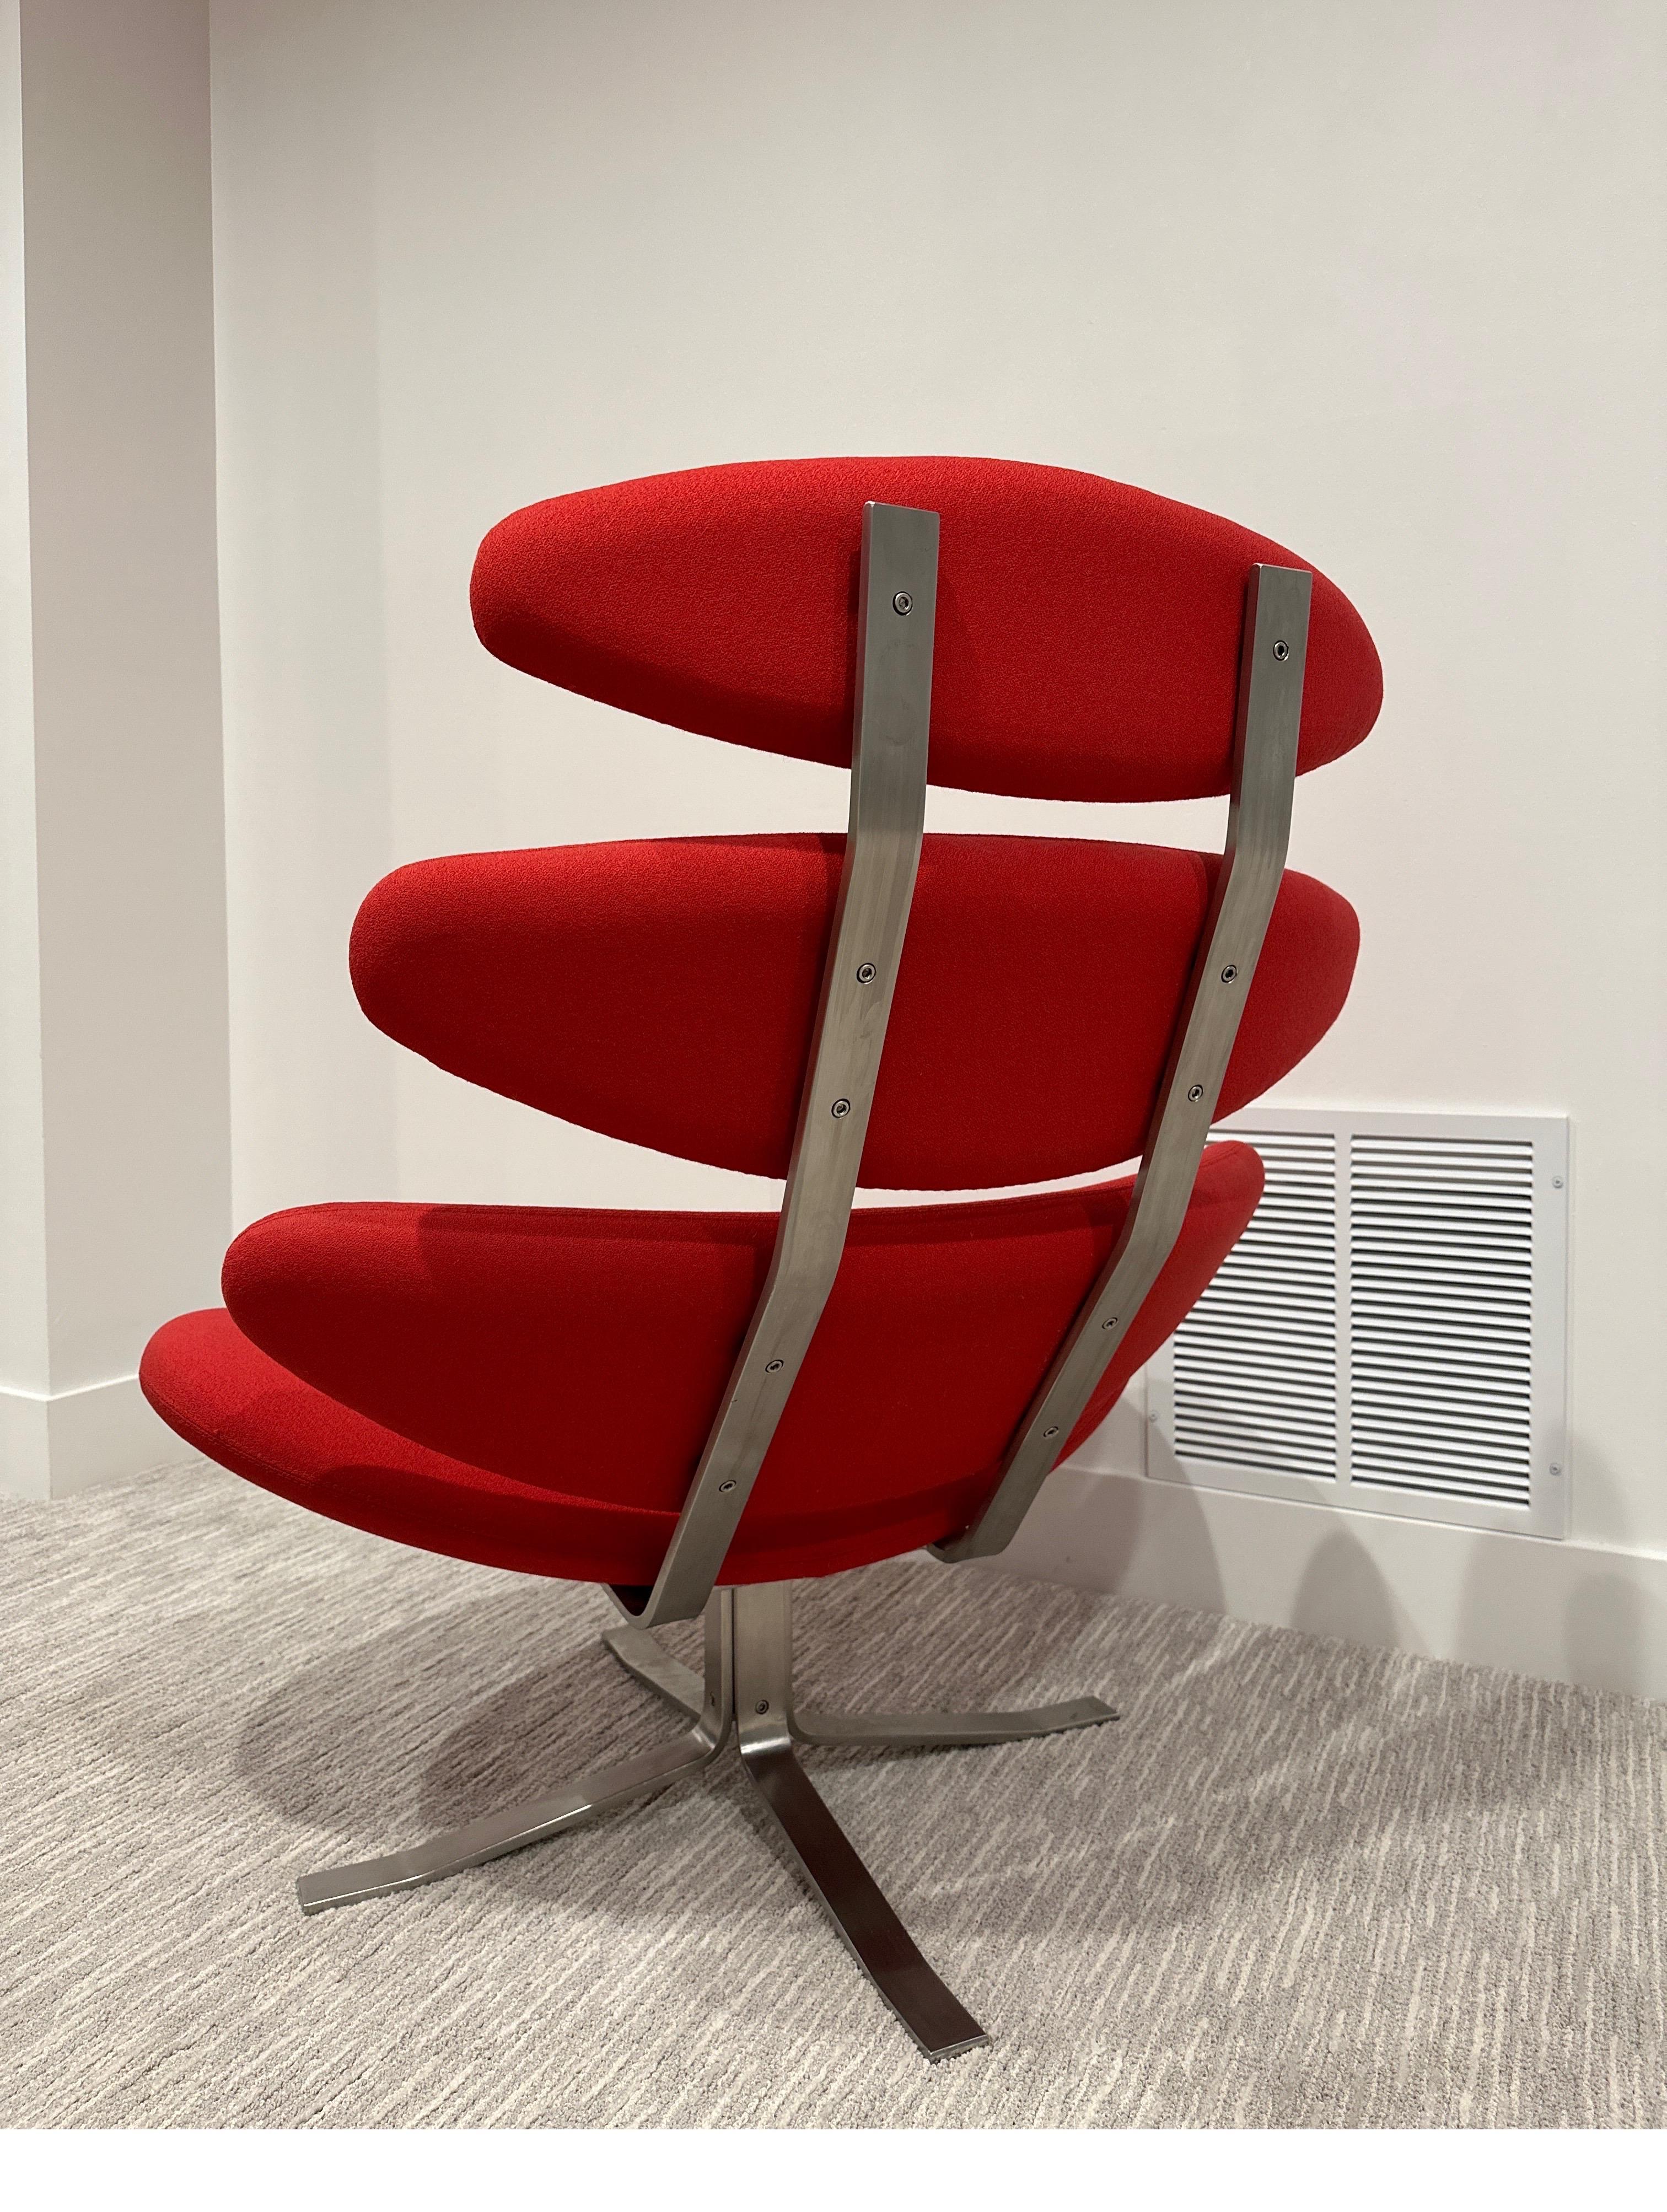 Danish Poul Volther Corona Red Lounge Swivel Chrome Chair and Ottoman Erik Jorgensen For Sale